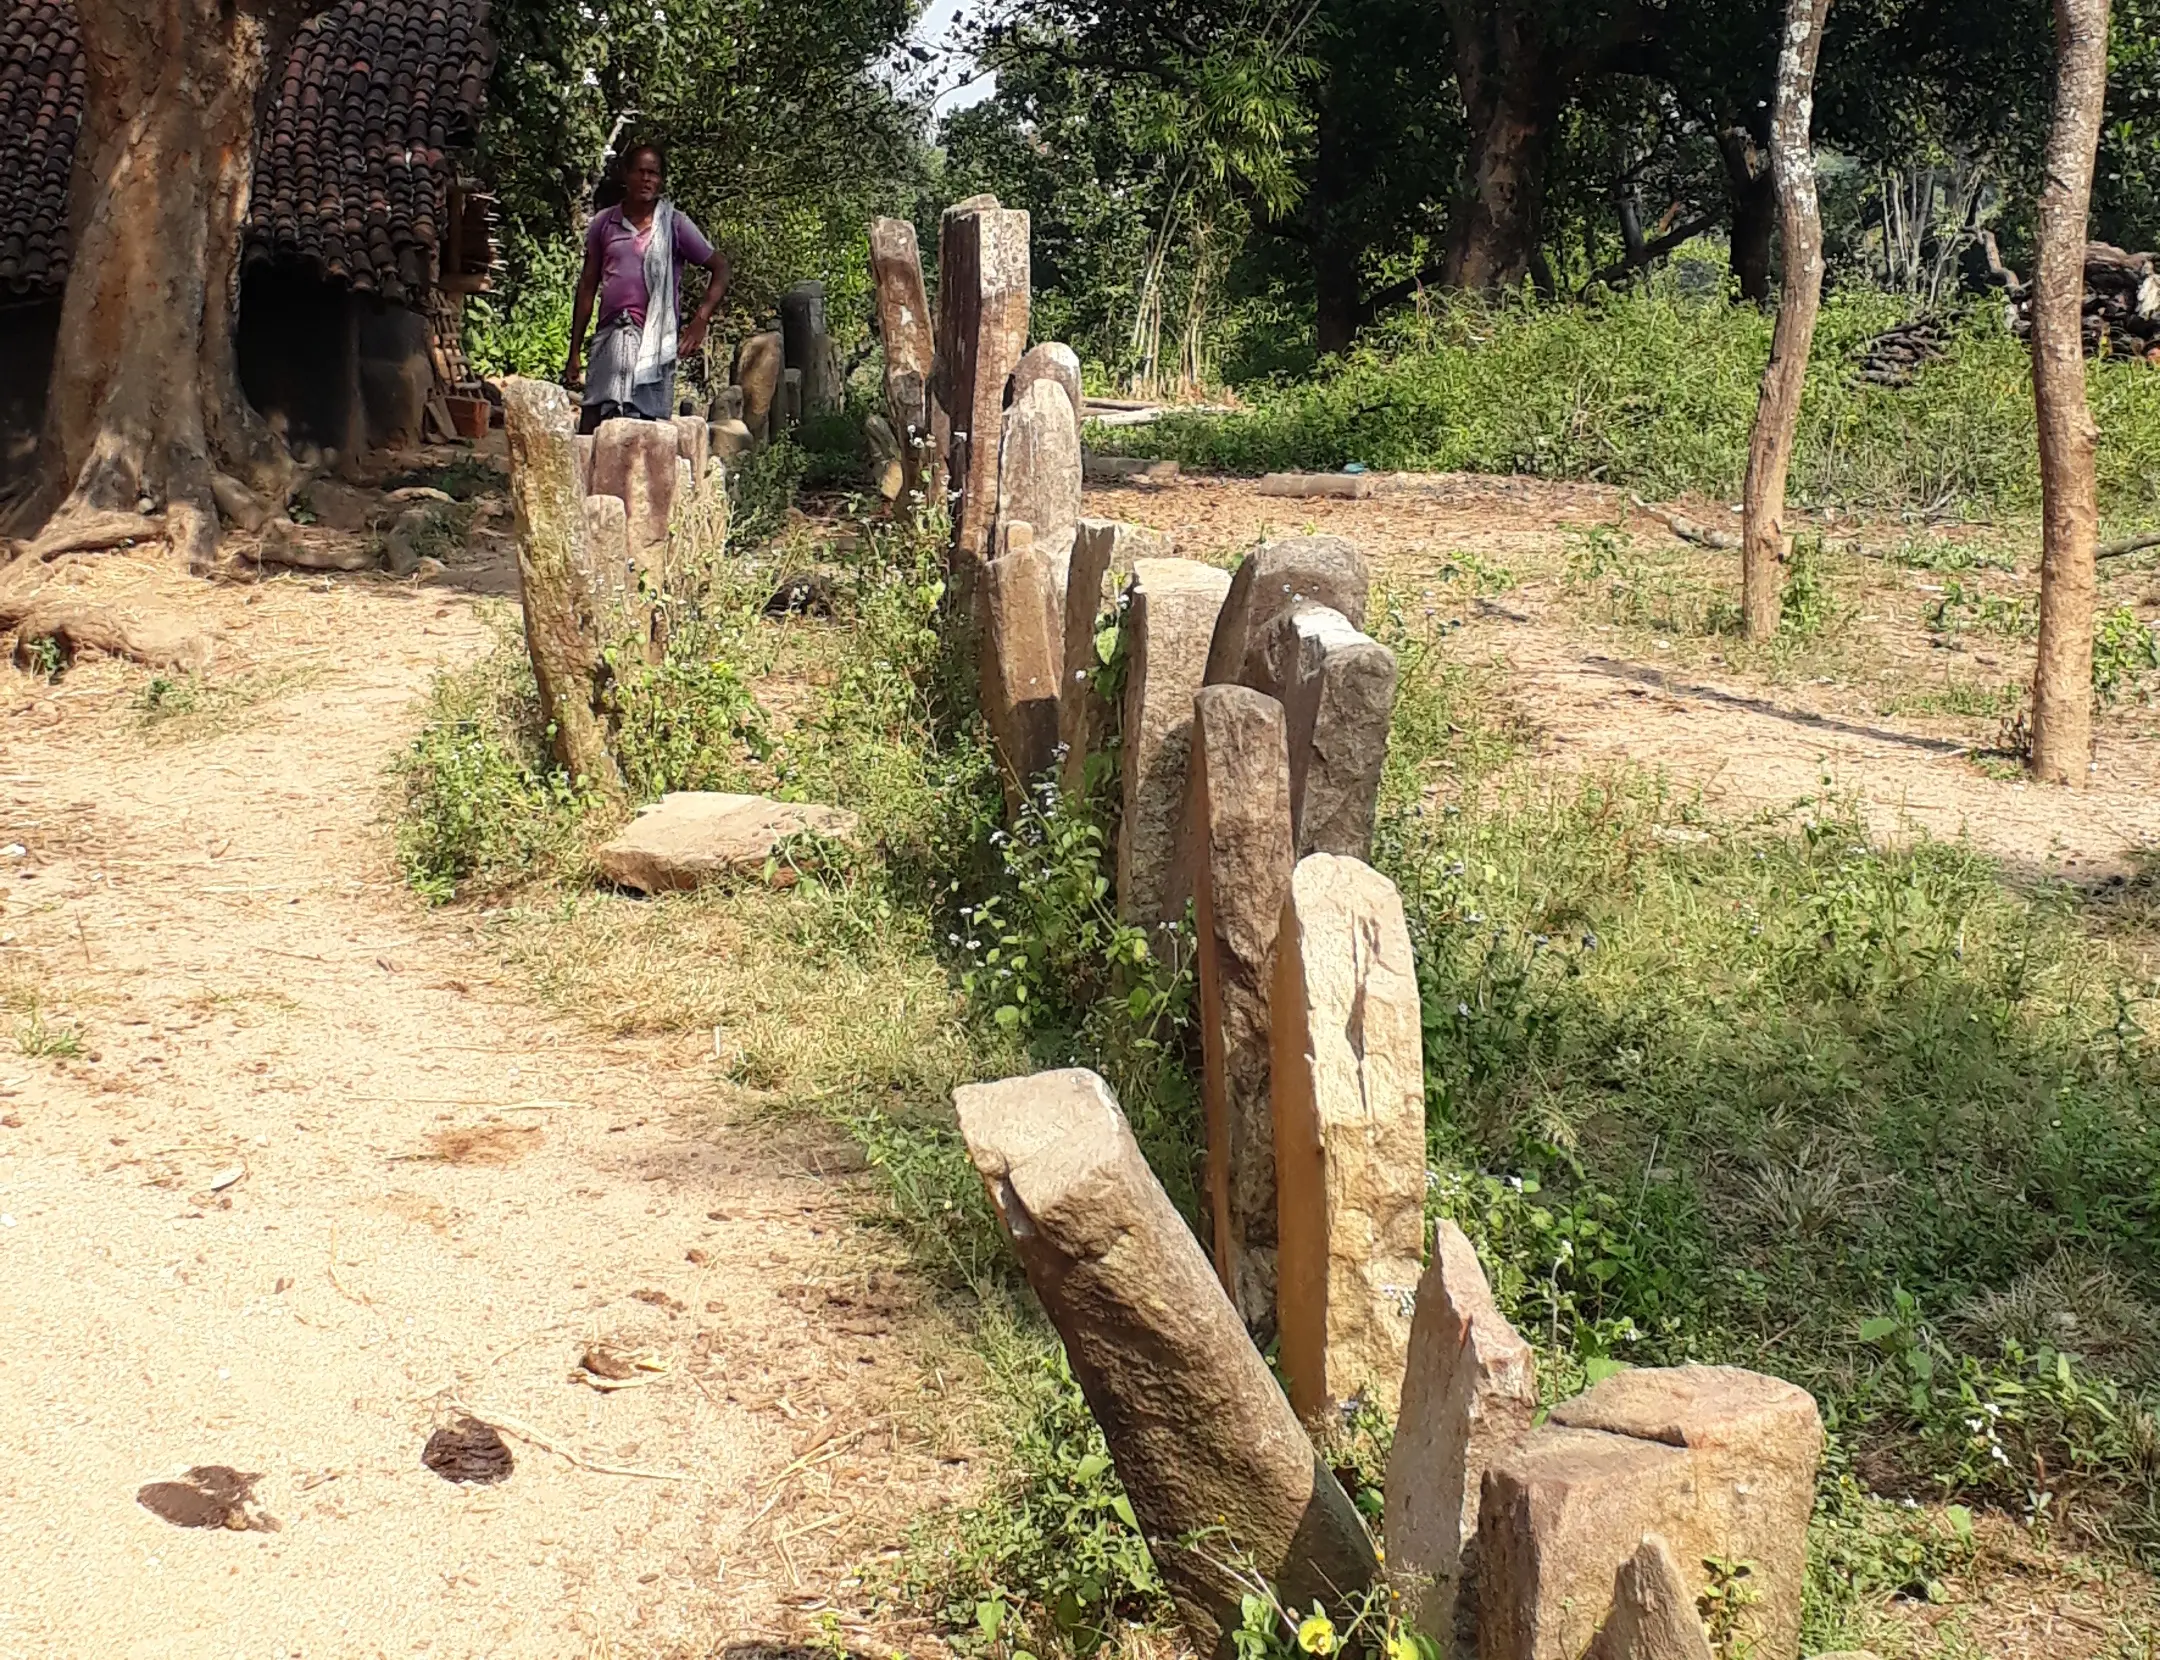 women stands in area where many stone slabs are erected